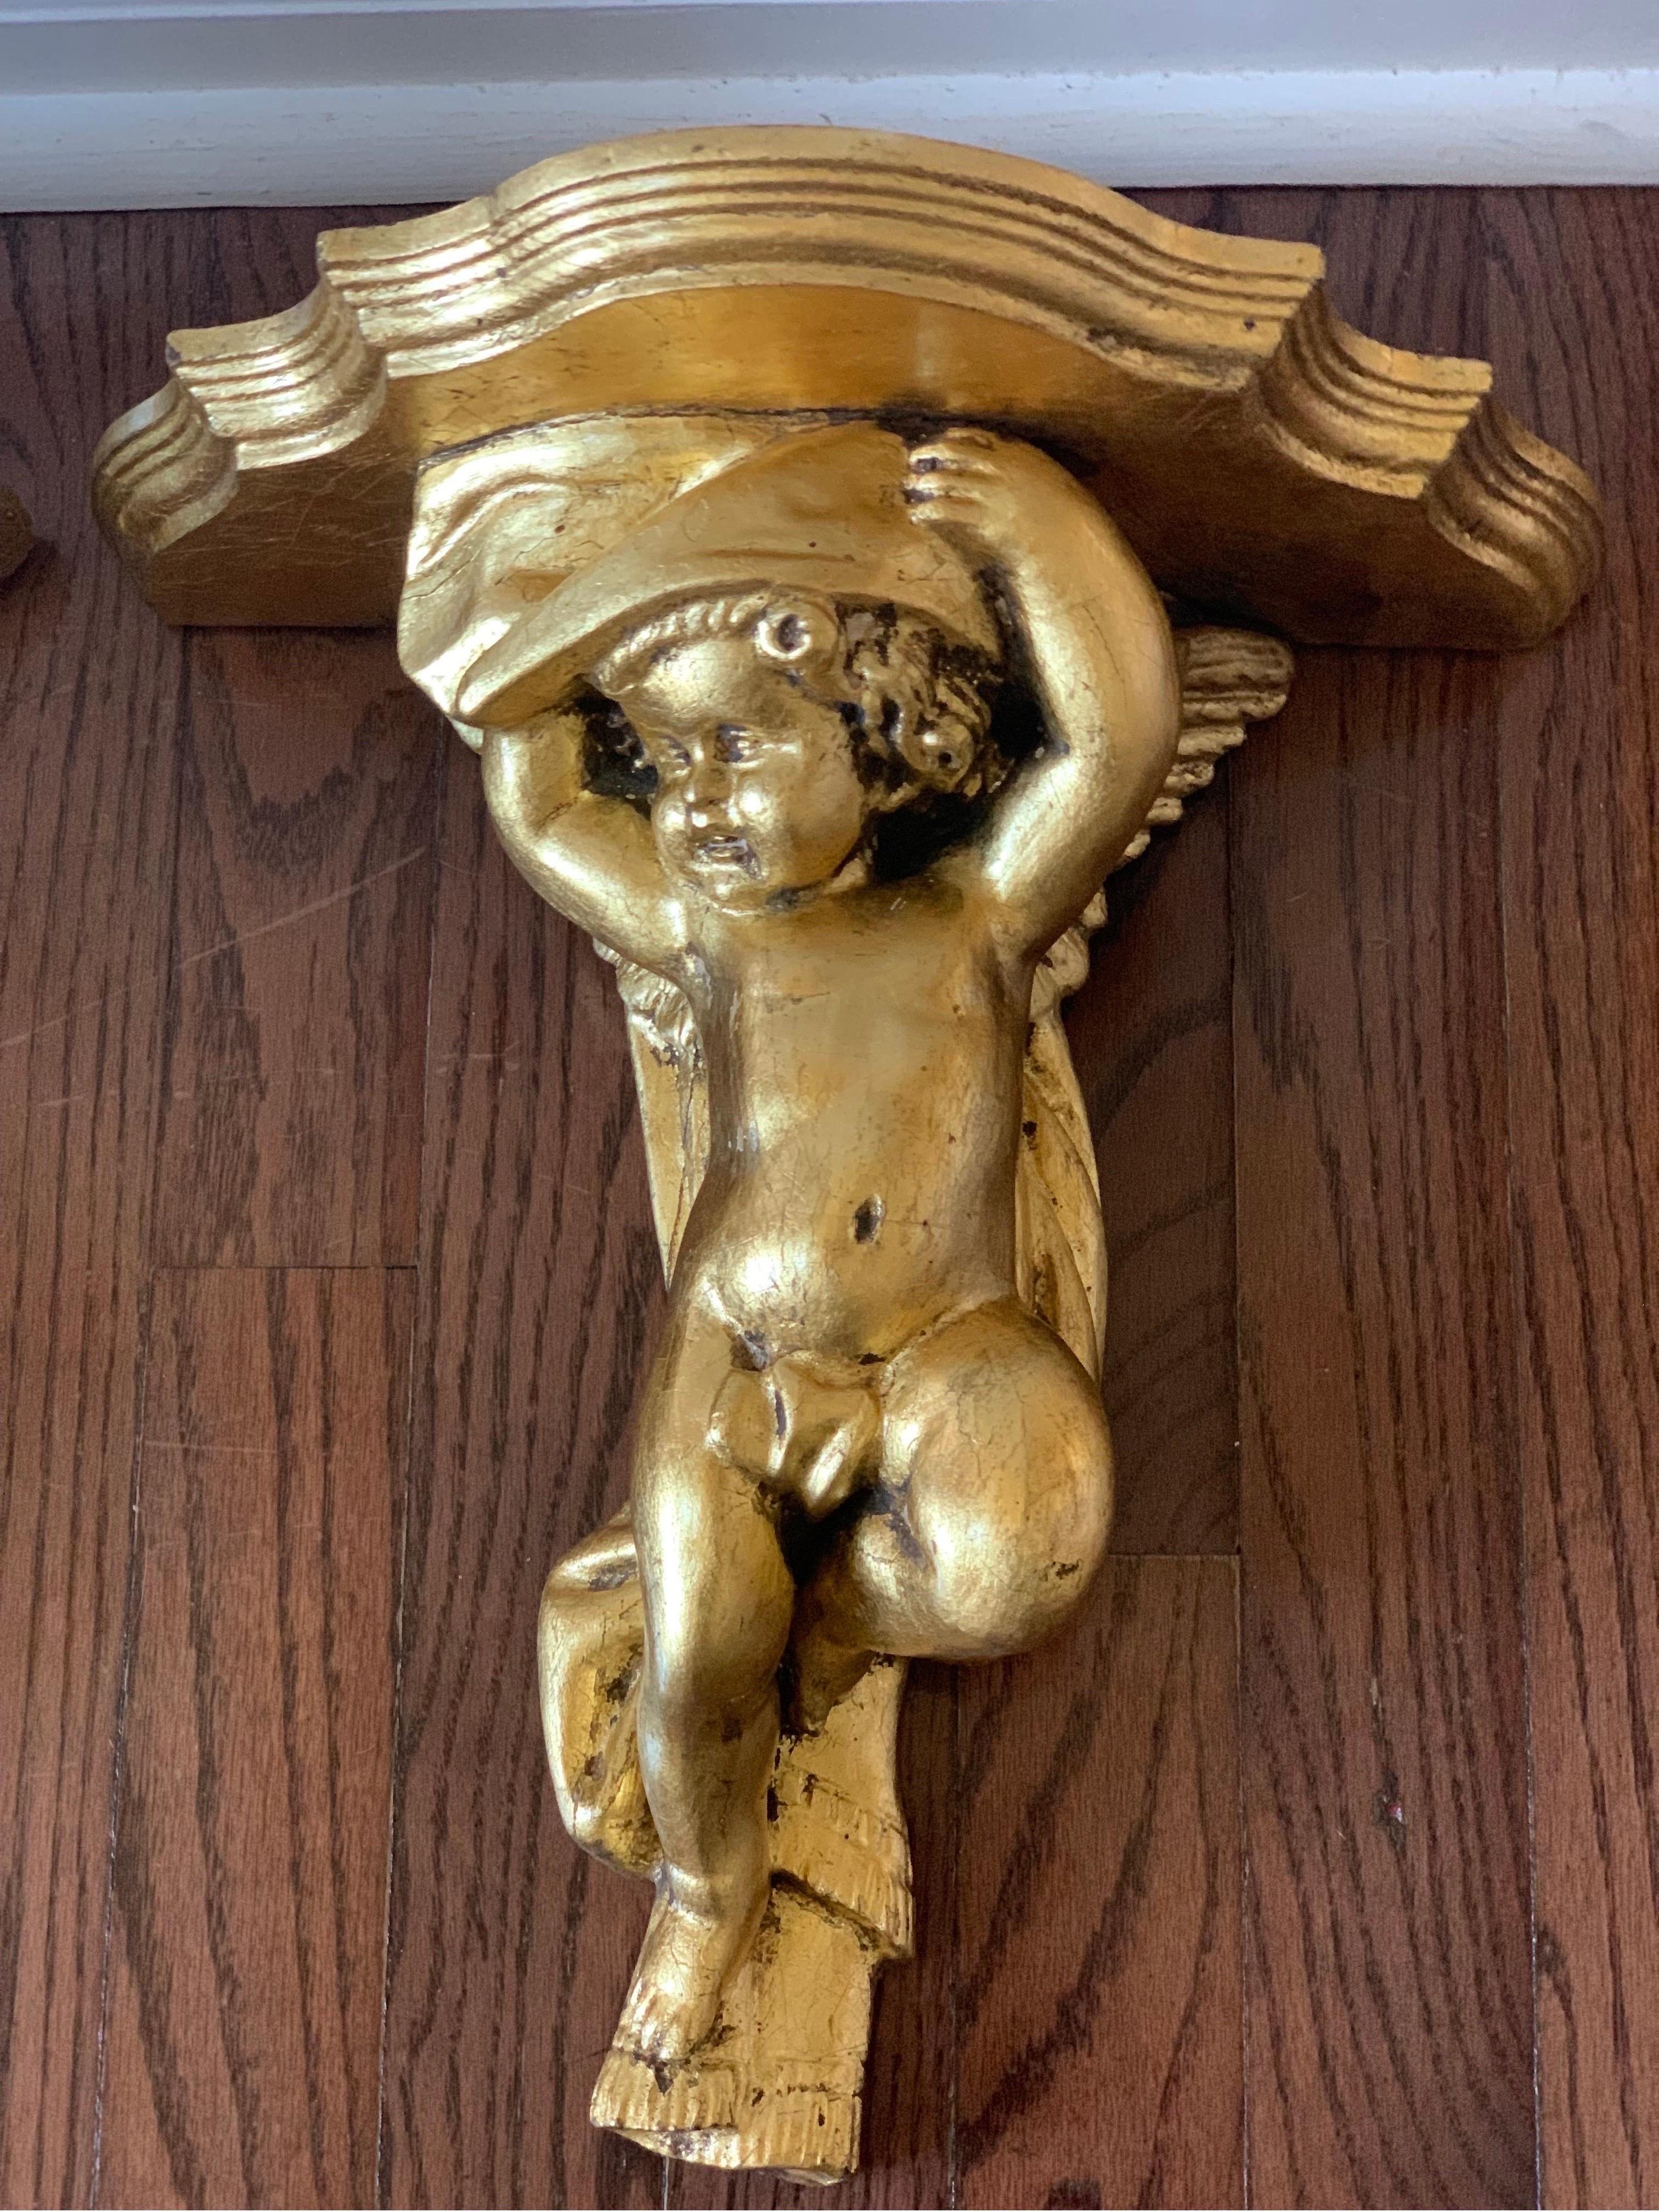 Charming pair of European hand carved gilt cherub wall bracket shelves, c. 1920. Hand crafted depicting an authentic pair with beautiful detail. Hooks are intact. In good condition.